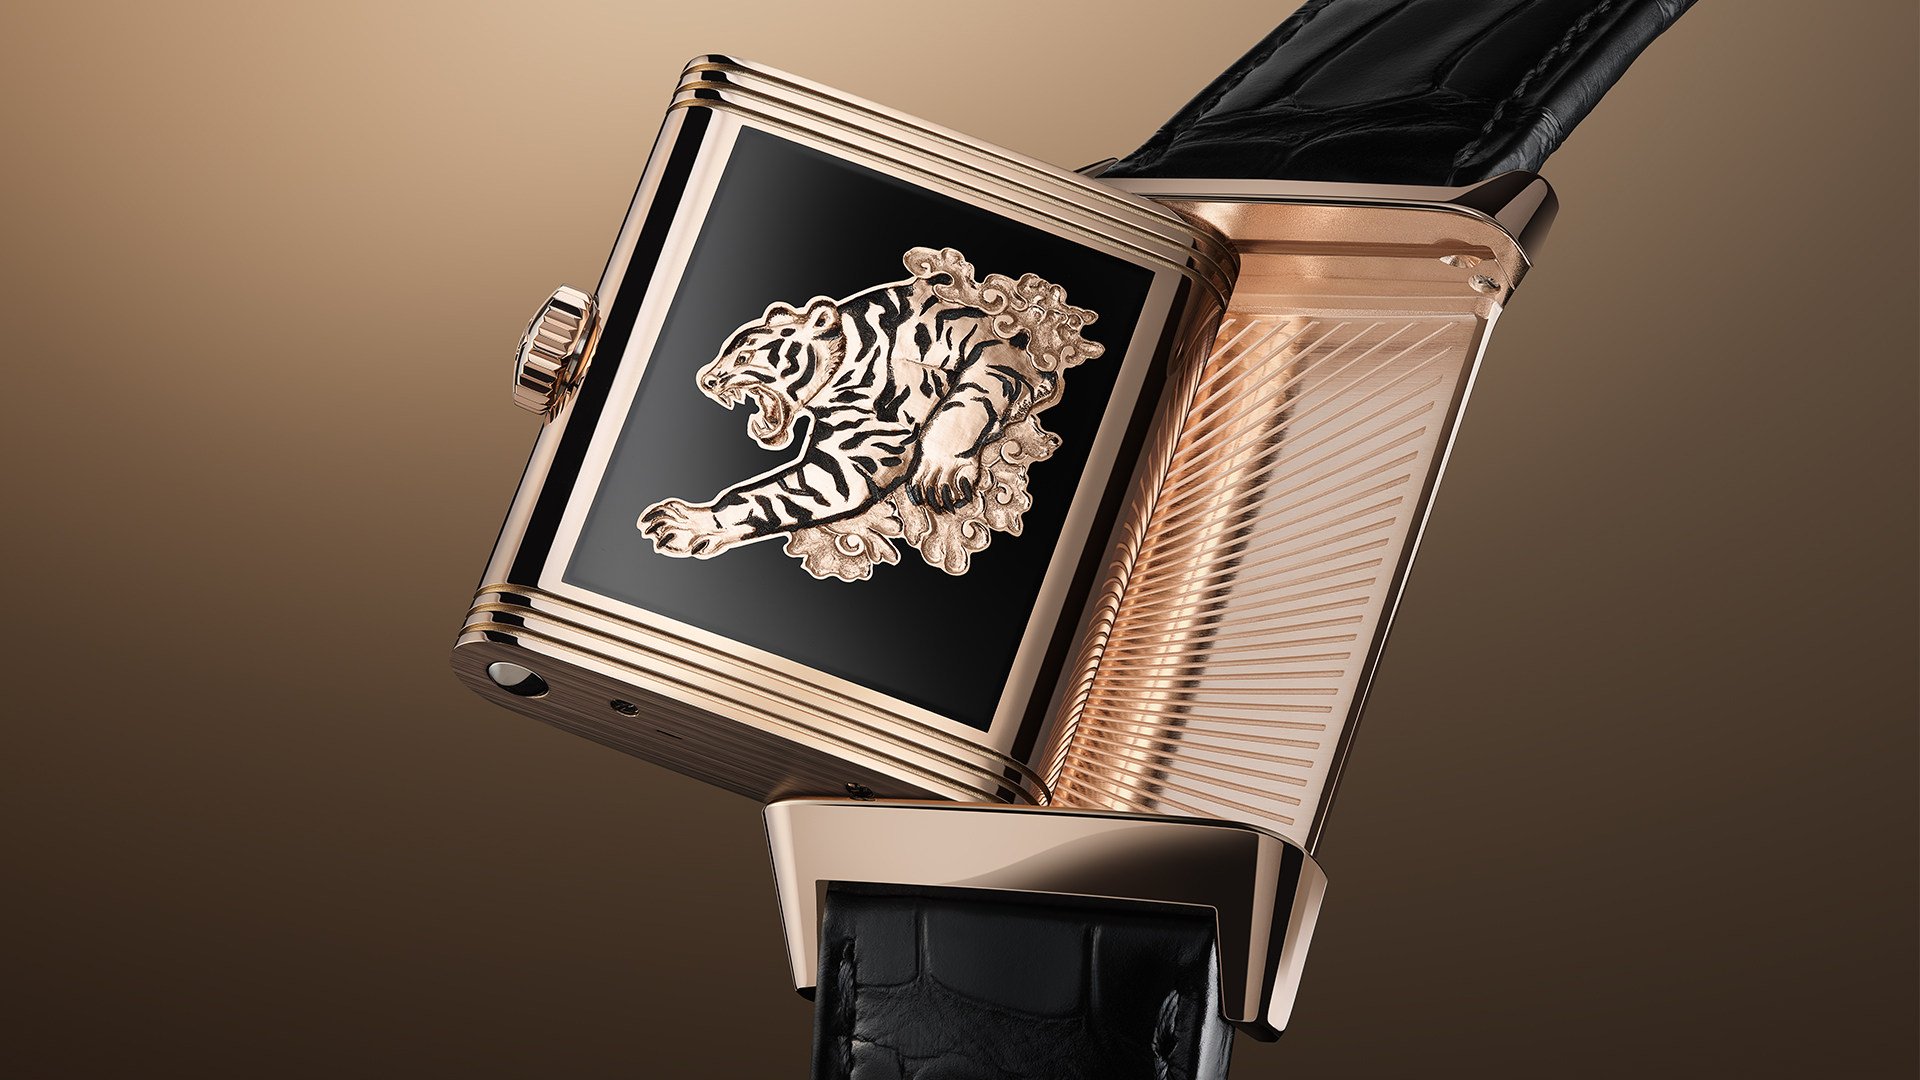 Jaeger-LeCoultre’s 2022 Reverso Tribute Enamel “Tiger” salutes a unique tradition in dials that can be flipped to protect them from harm, while exposing a fresh surface ripe for ornamentation. Photo: Jaeger-LeCoultre